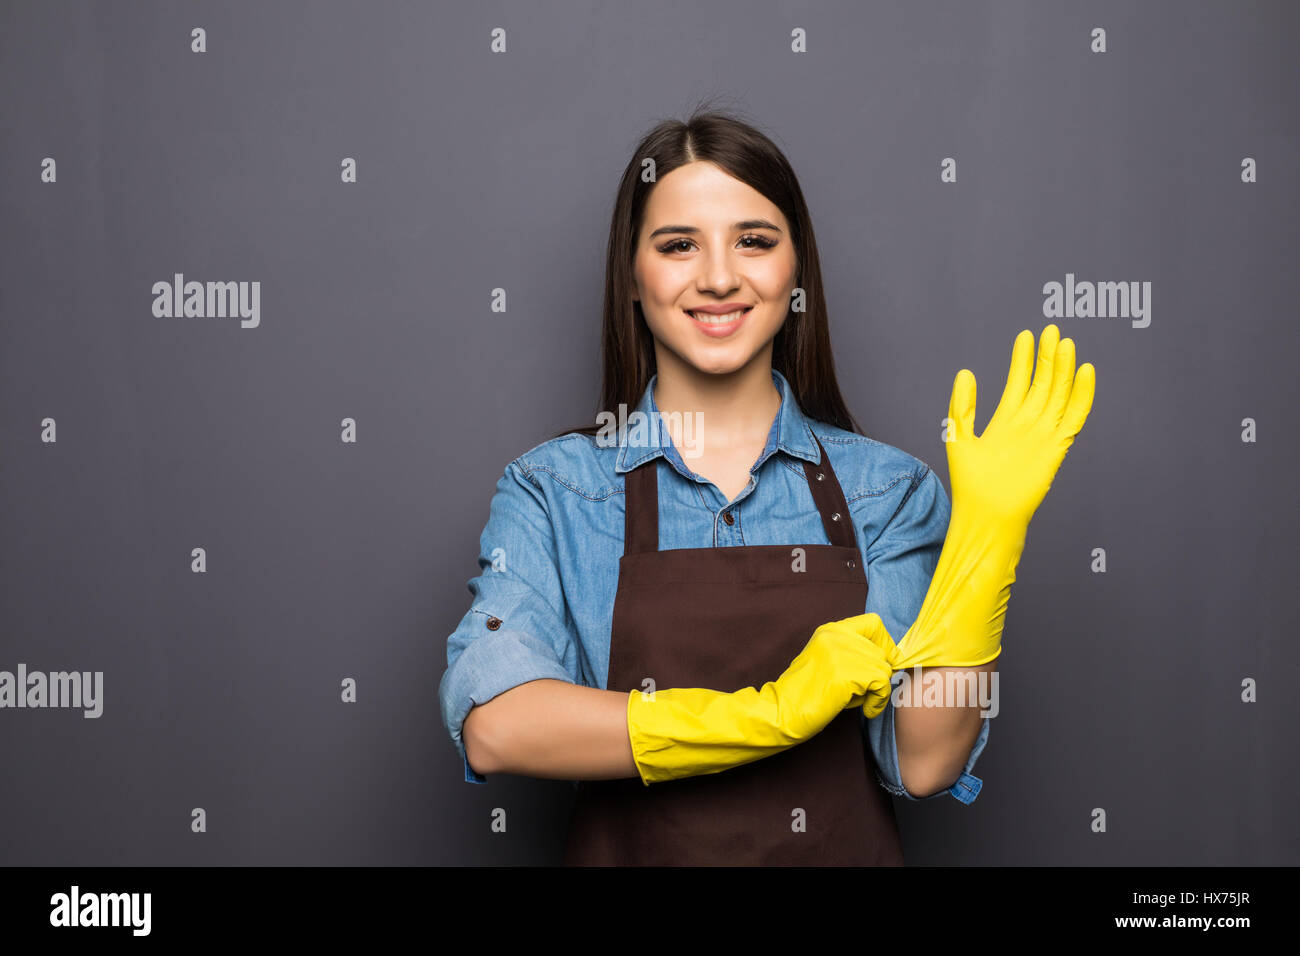 Cheerful housewife putting on gloves before cleaning on grey Stock Photo